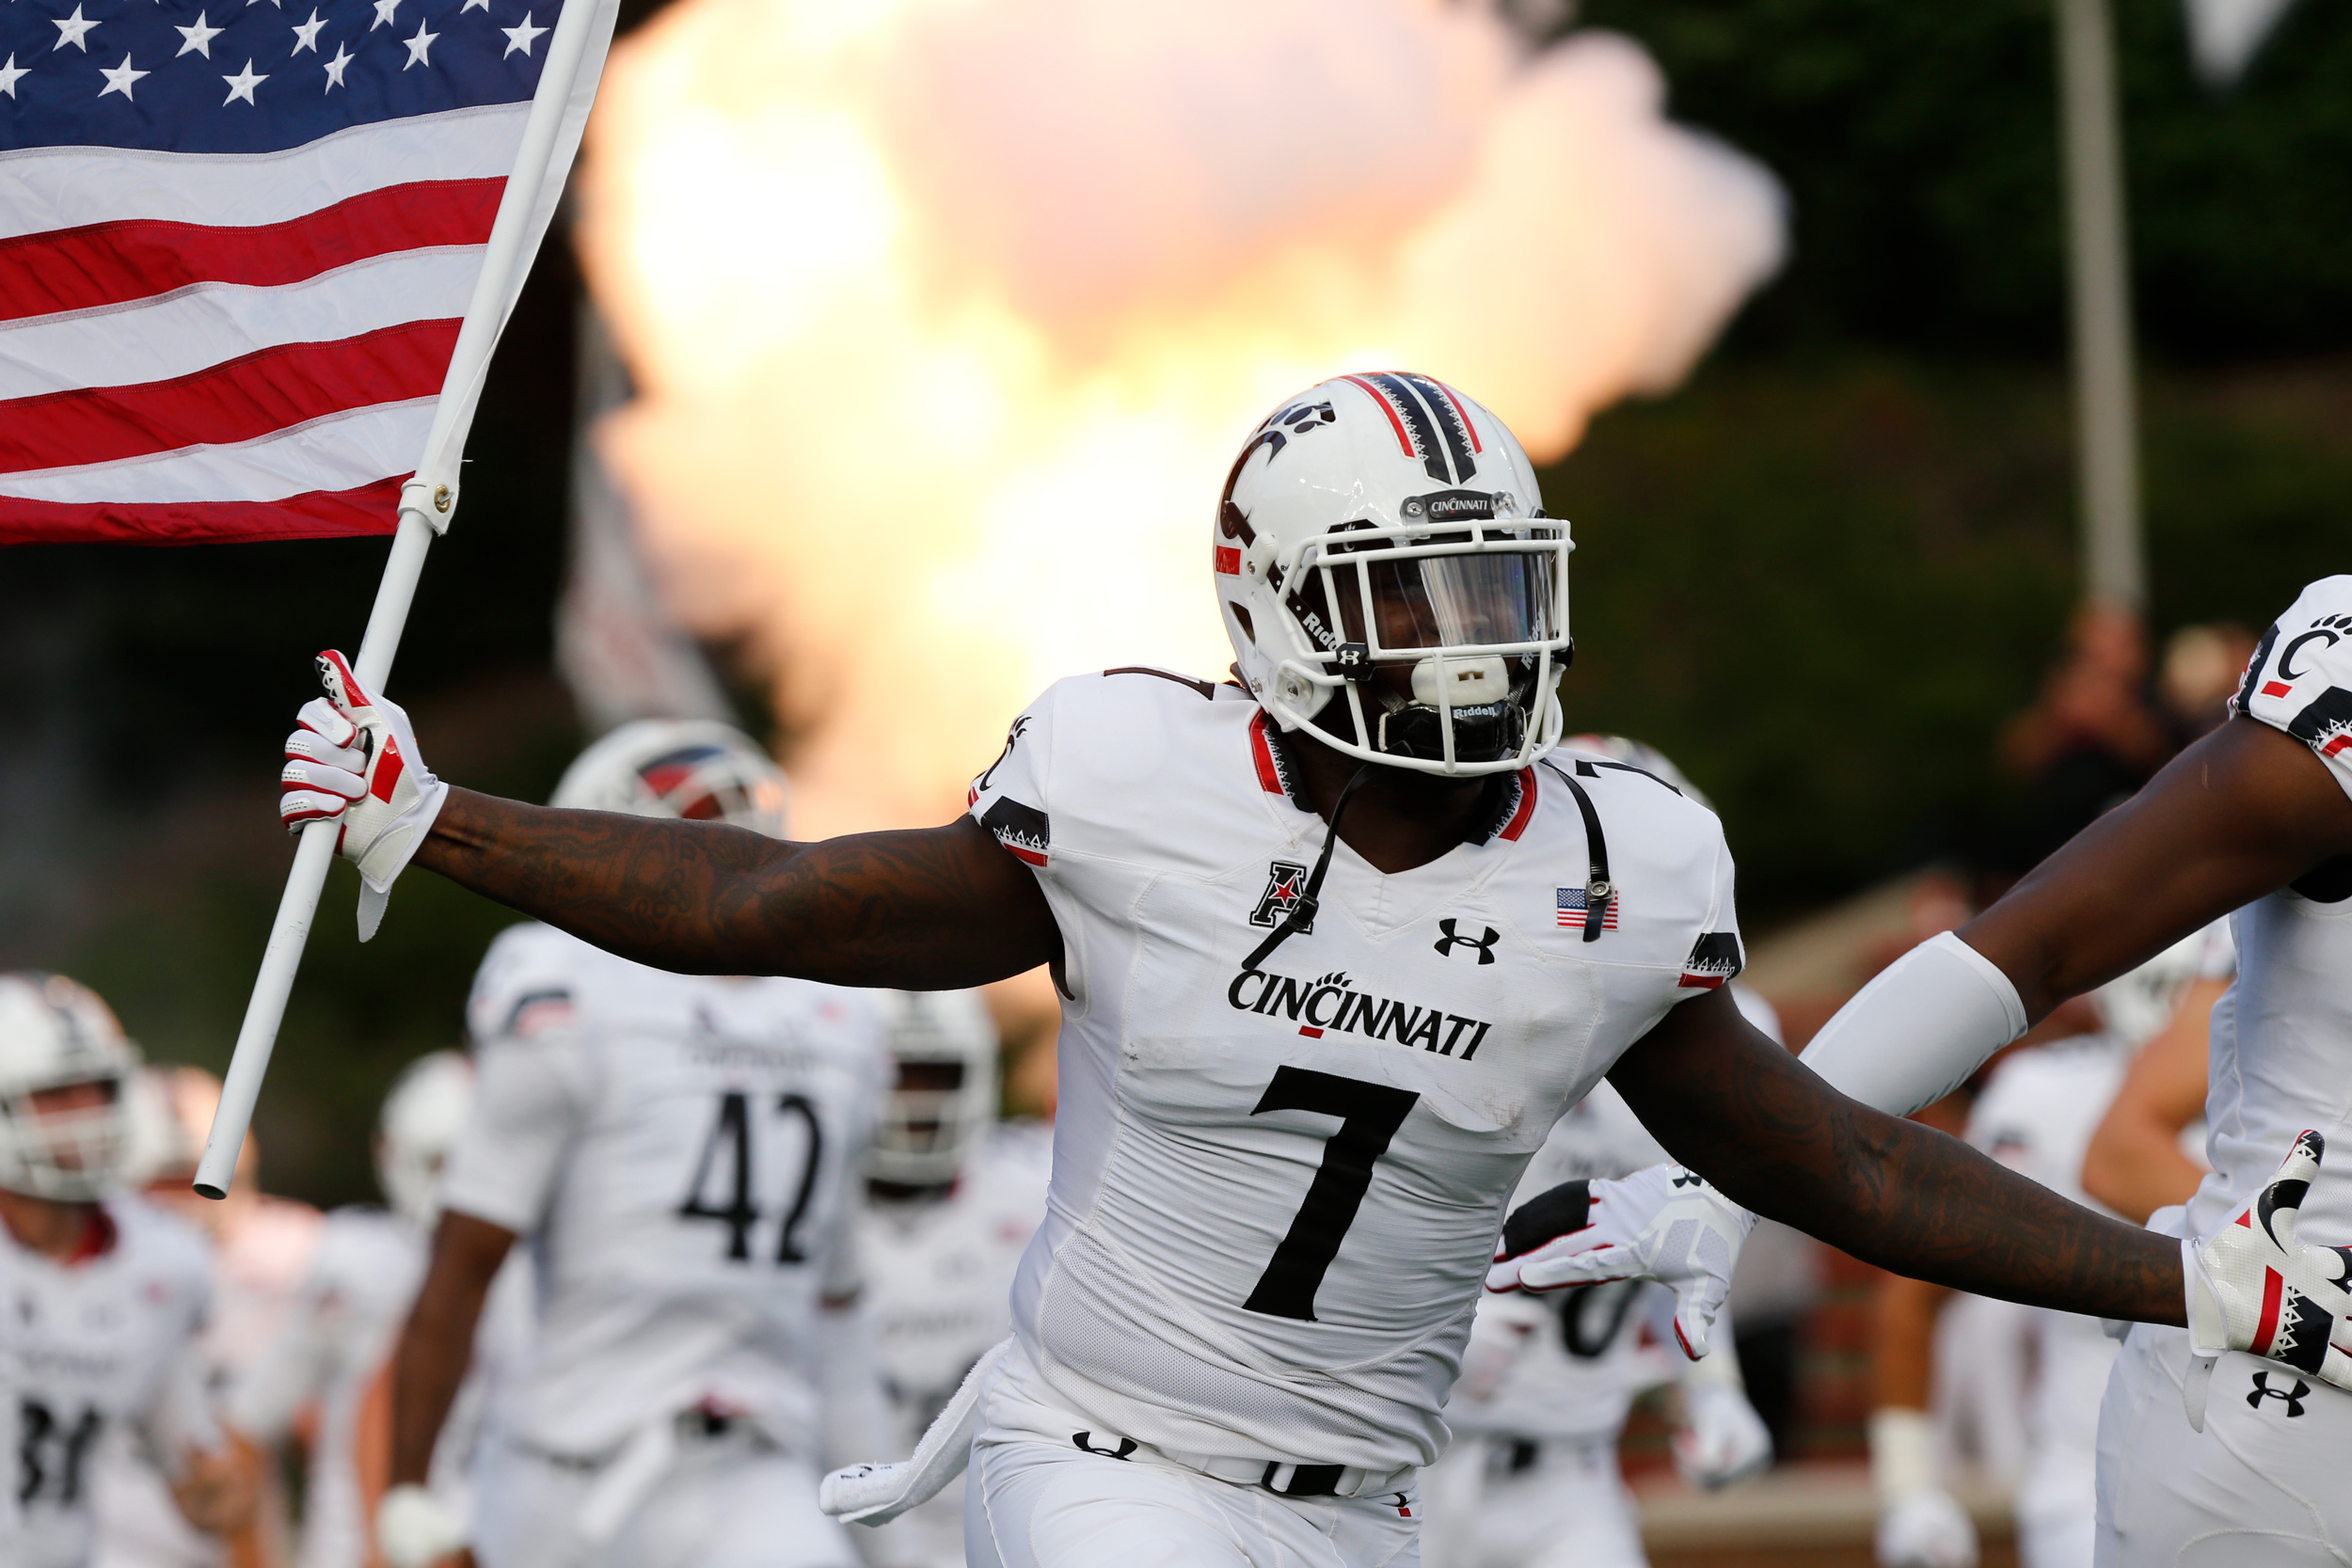 A UC football player takes the field while holding an American flag